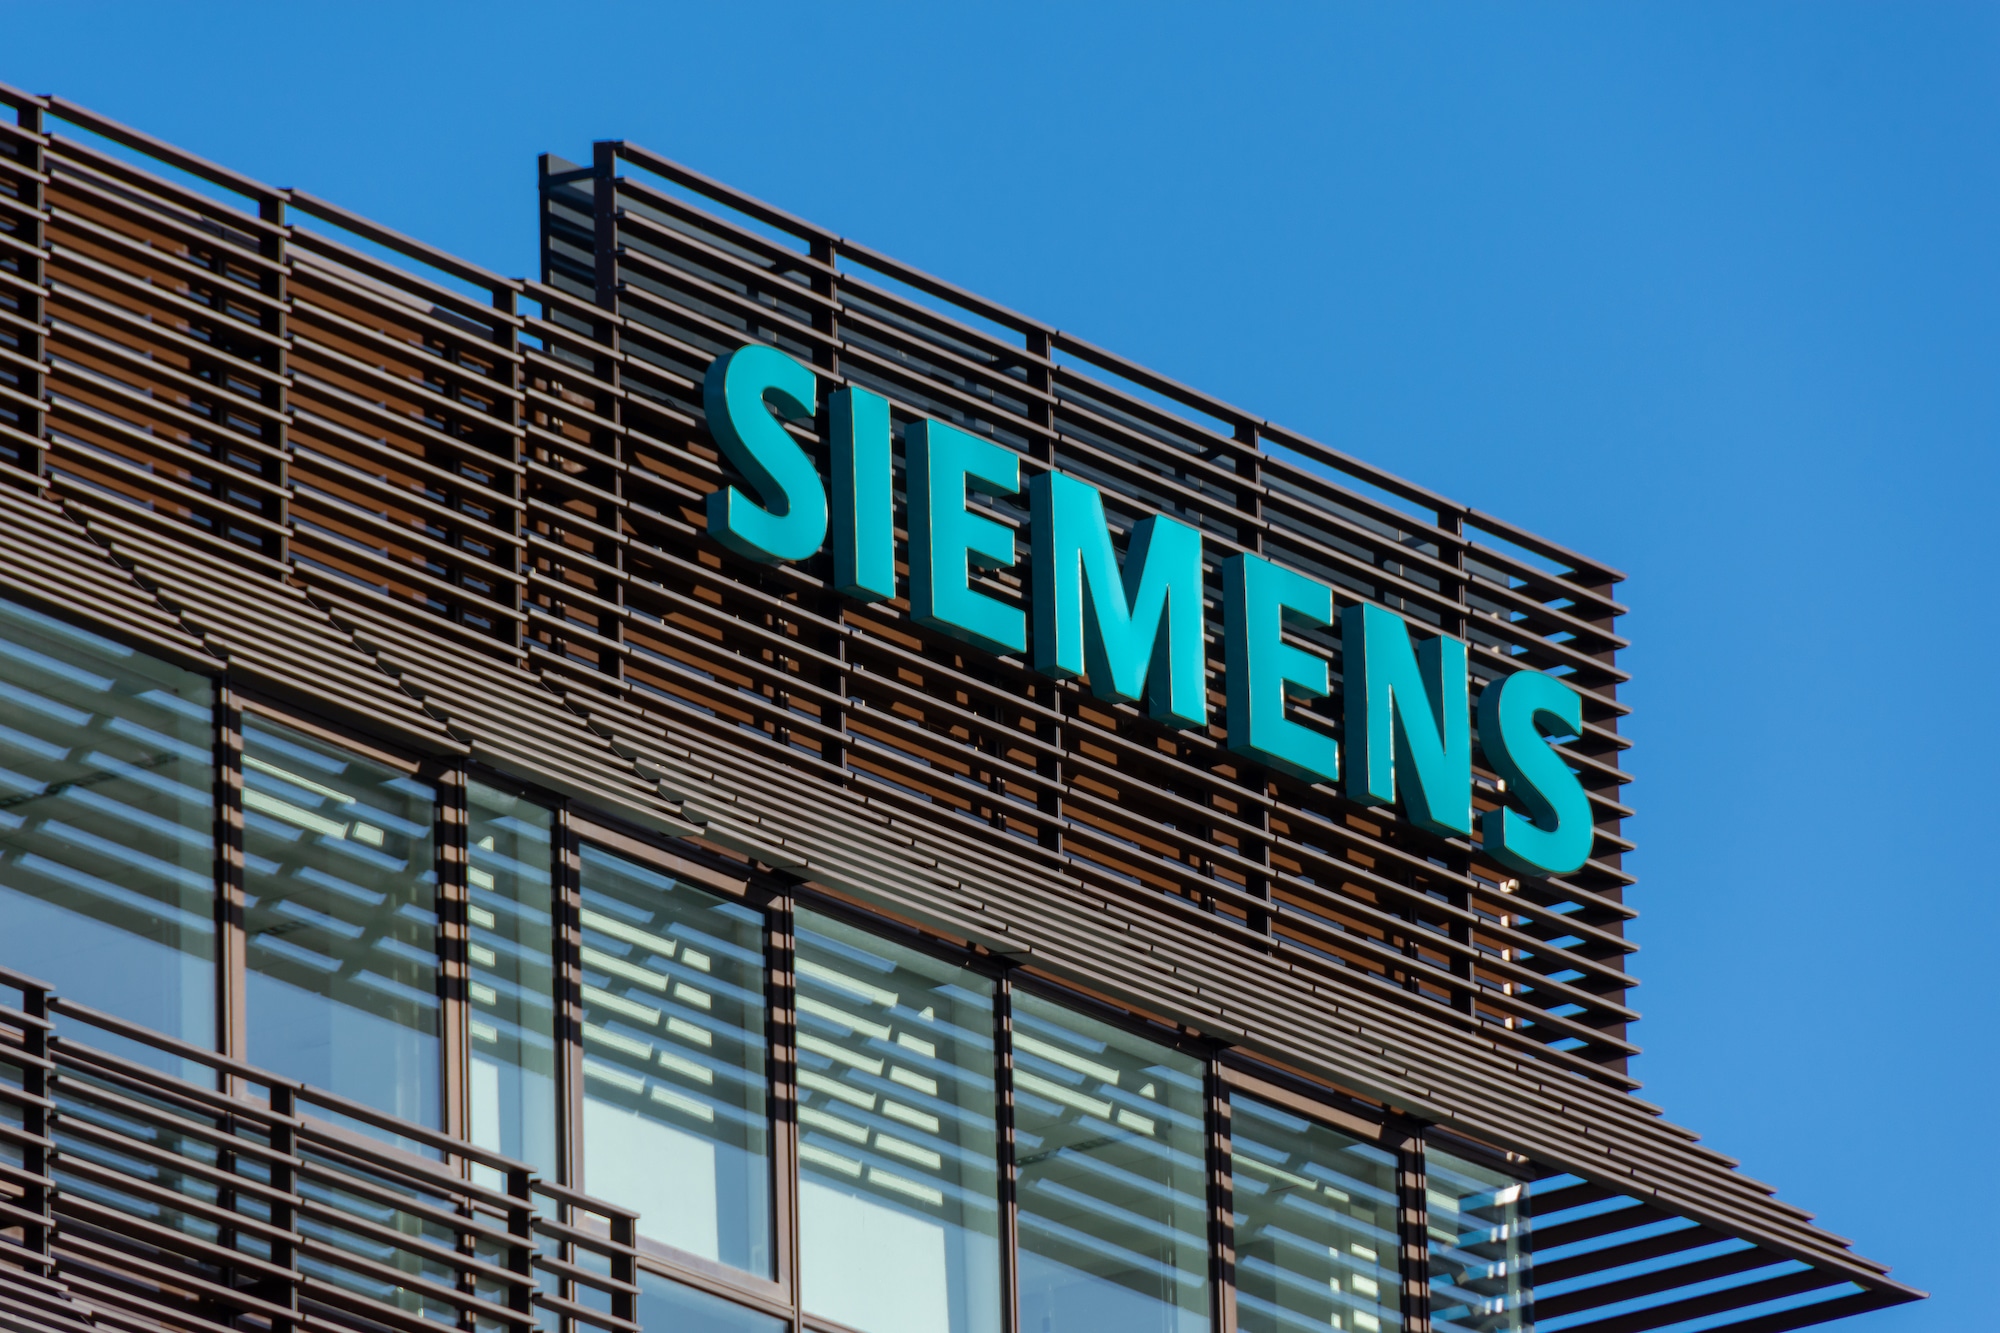 Siemens is hiring for the role of Graduate Trainee Engineer – UI! | Apply here!